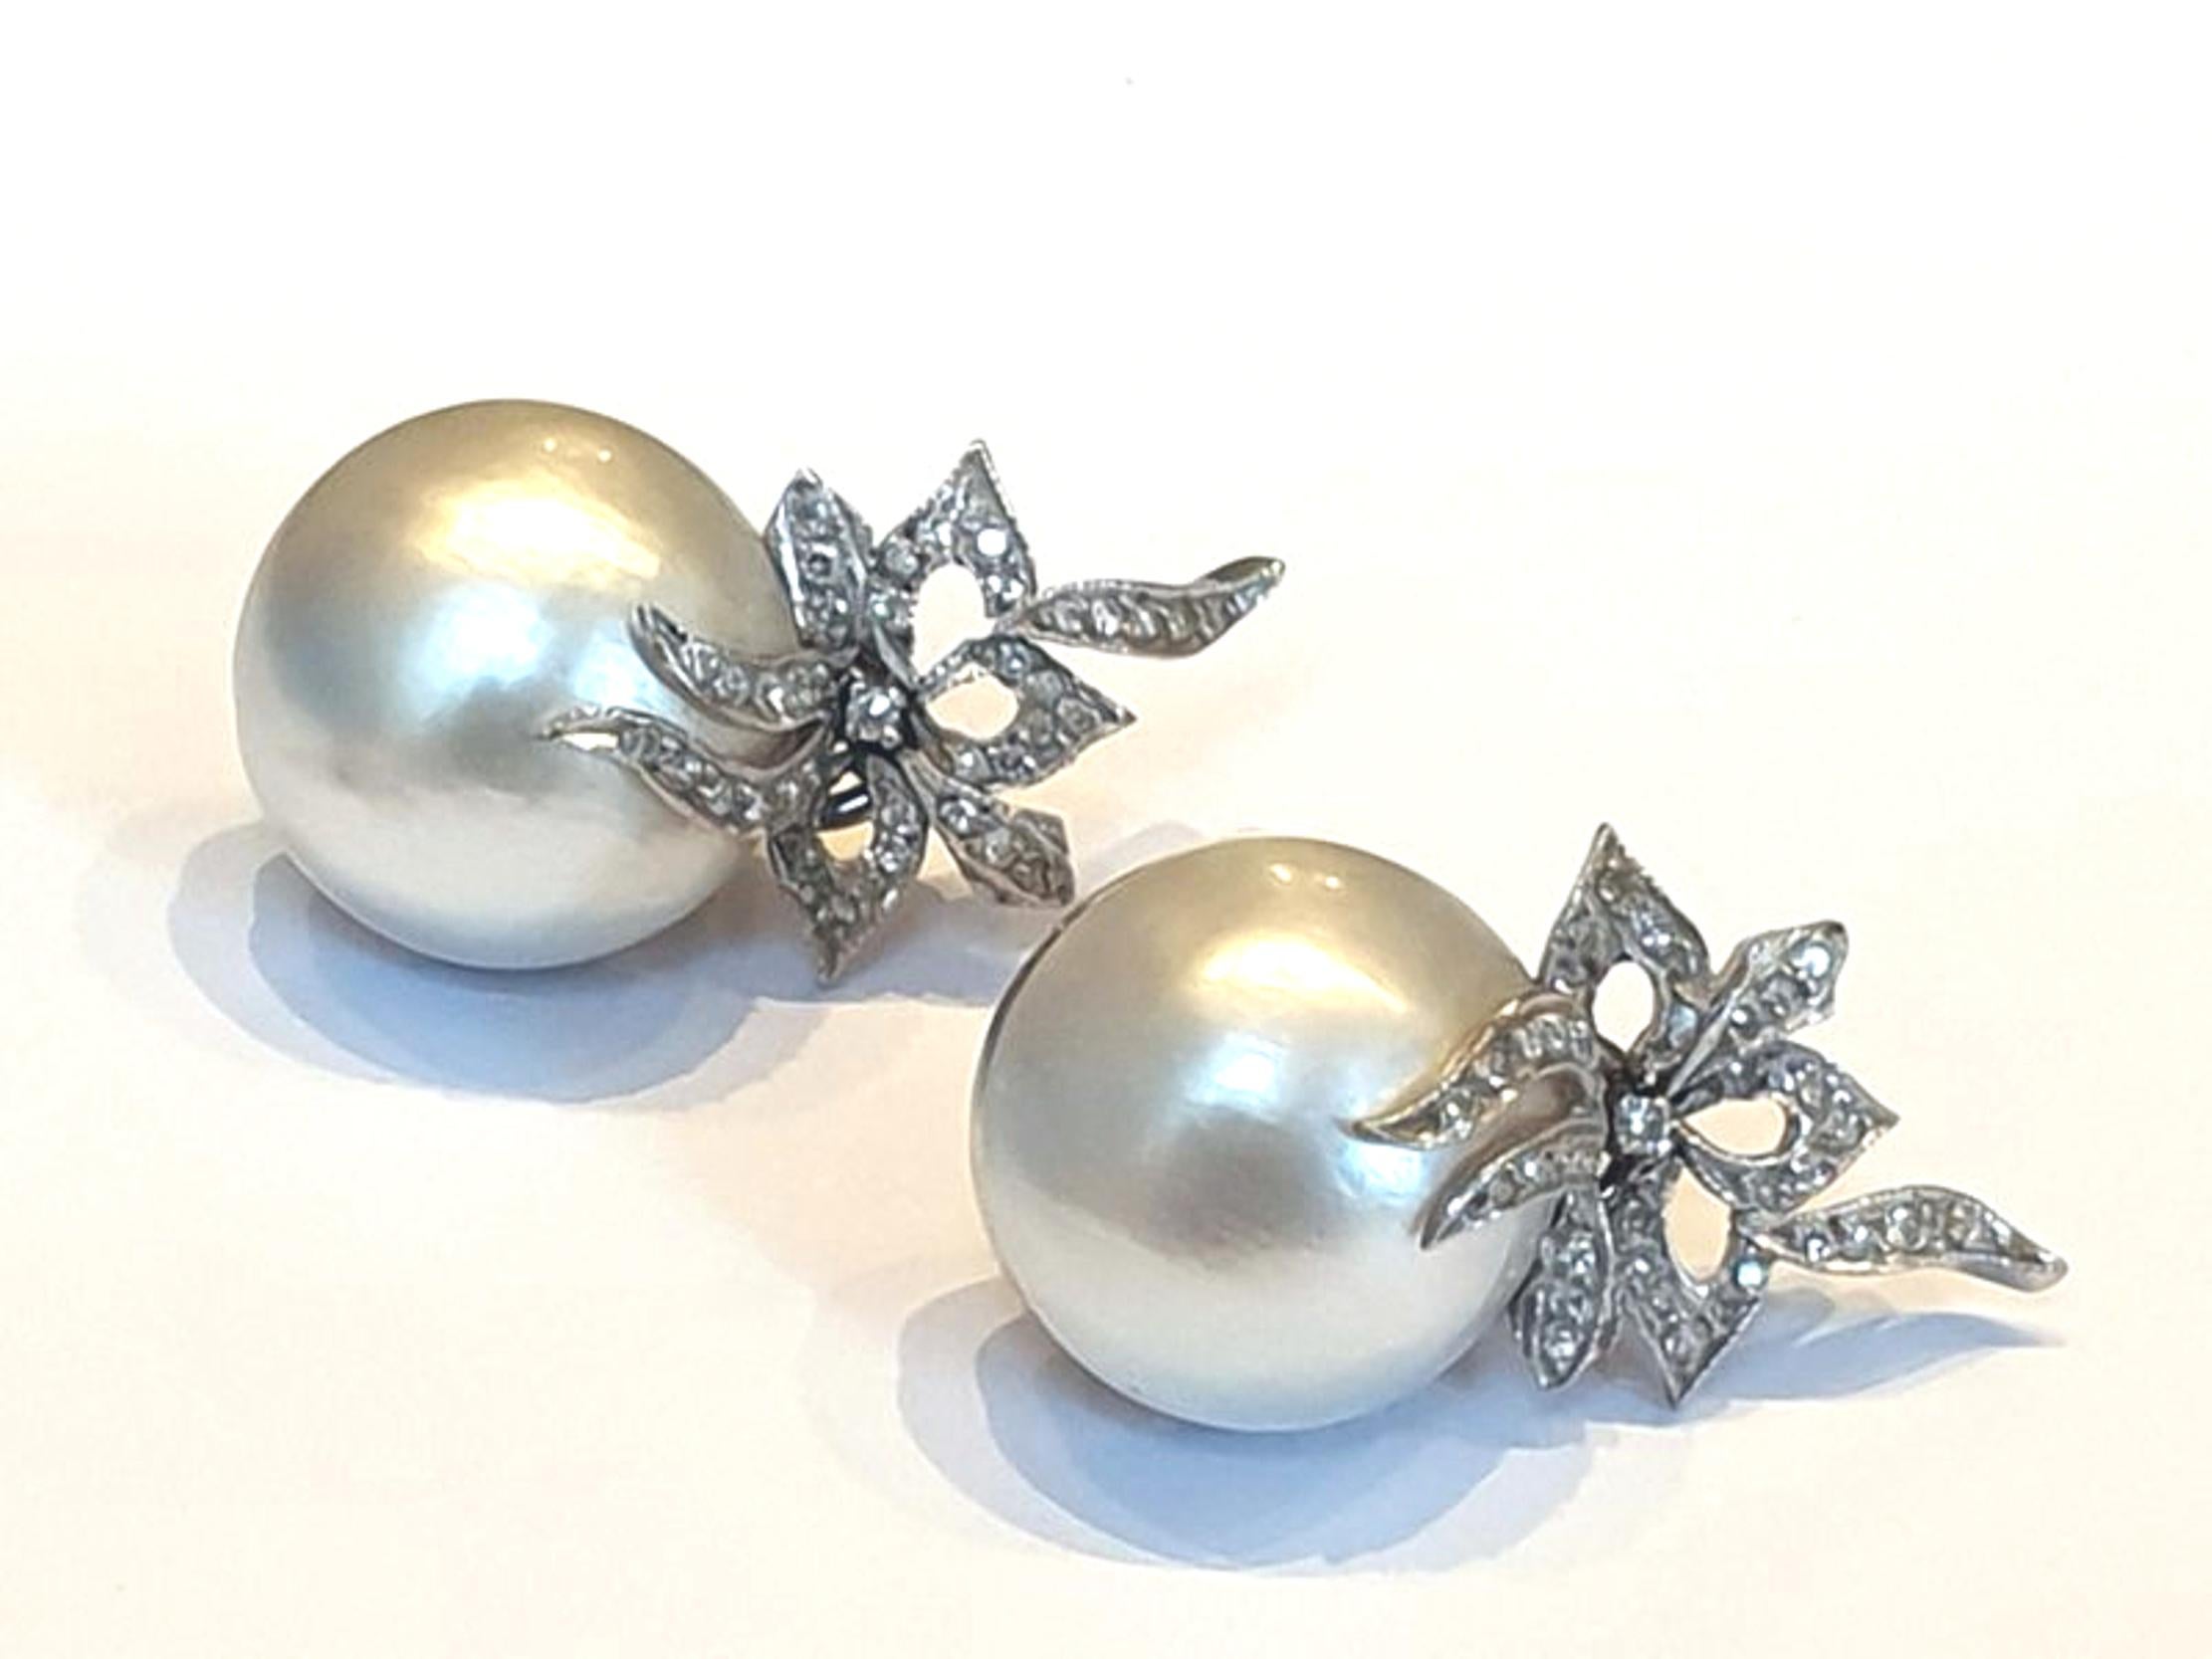 Introducing the epitome of timeless elegance and sophistication - the Platin Mape Pearl Earrings adorned with 78 exquisite diamonds totaling a stunning 0.79 carats. Crafted with meticulous attention to detail, these earrings are not merely